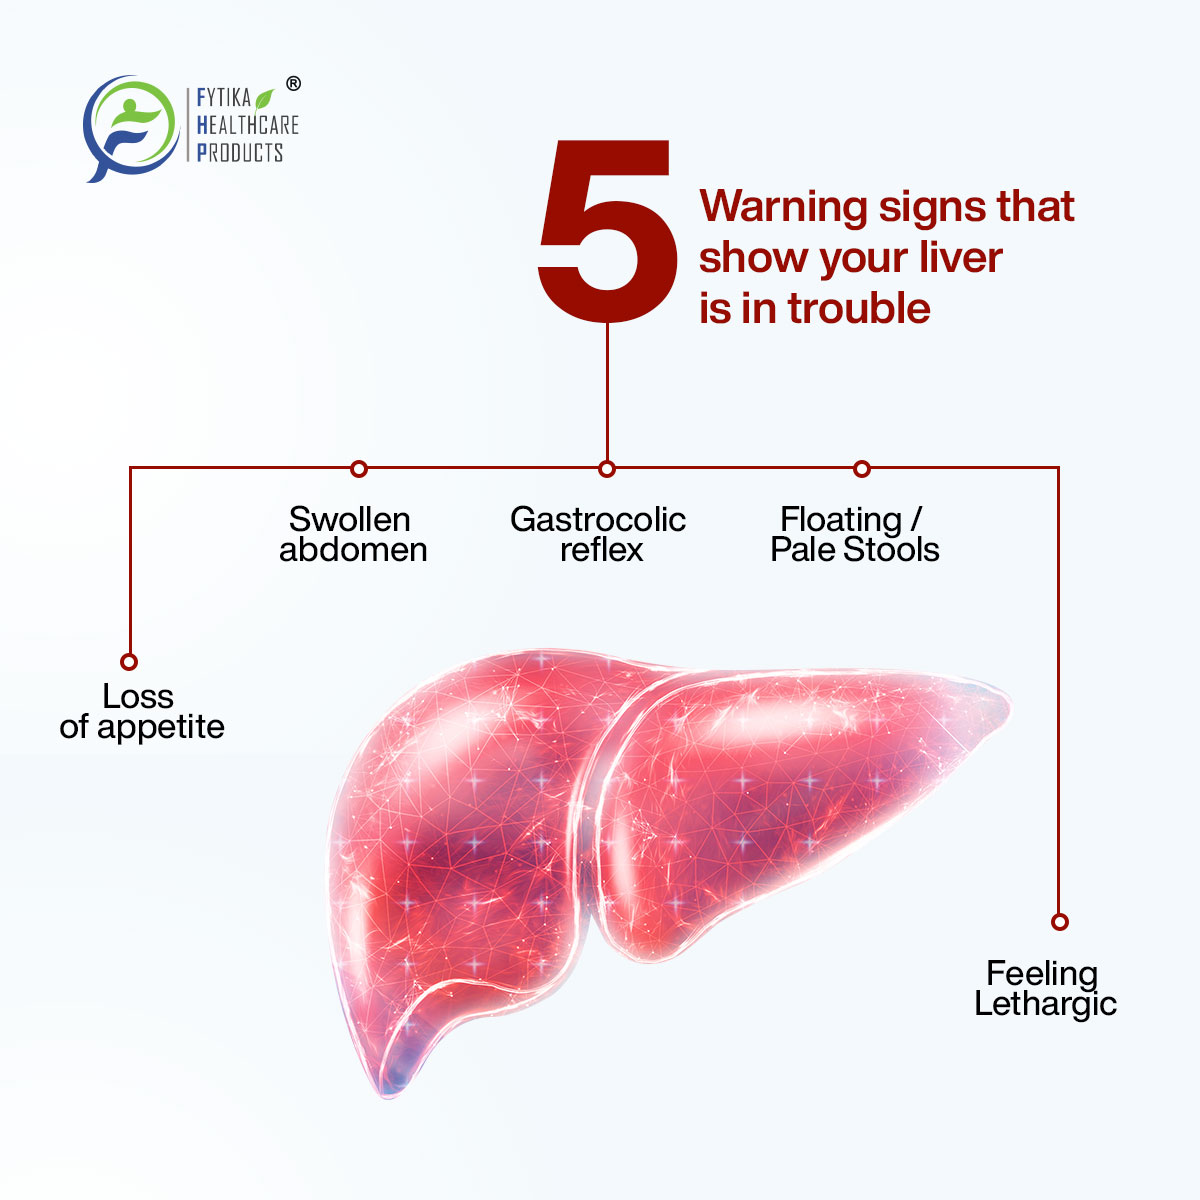 Here are 5 warning signs that might indicate your liver needs some extra love and attention
#LiverHealth #FytikaFitLiver #HealthyLiving #WellnessJourney #LiverCare #HealthyHabits #LoveYourLiver #FytikaHealthcare #LiverWellness #GutHealth #WellnessTips #BalancedLiving